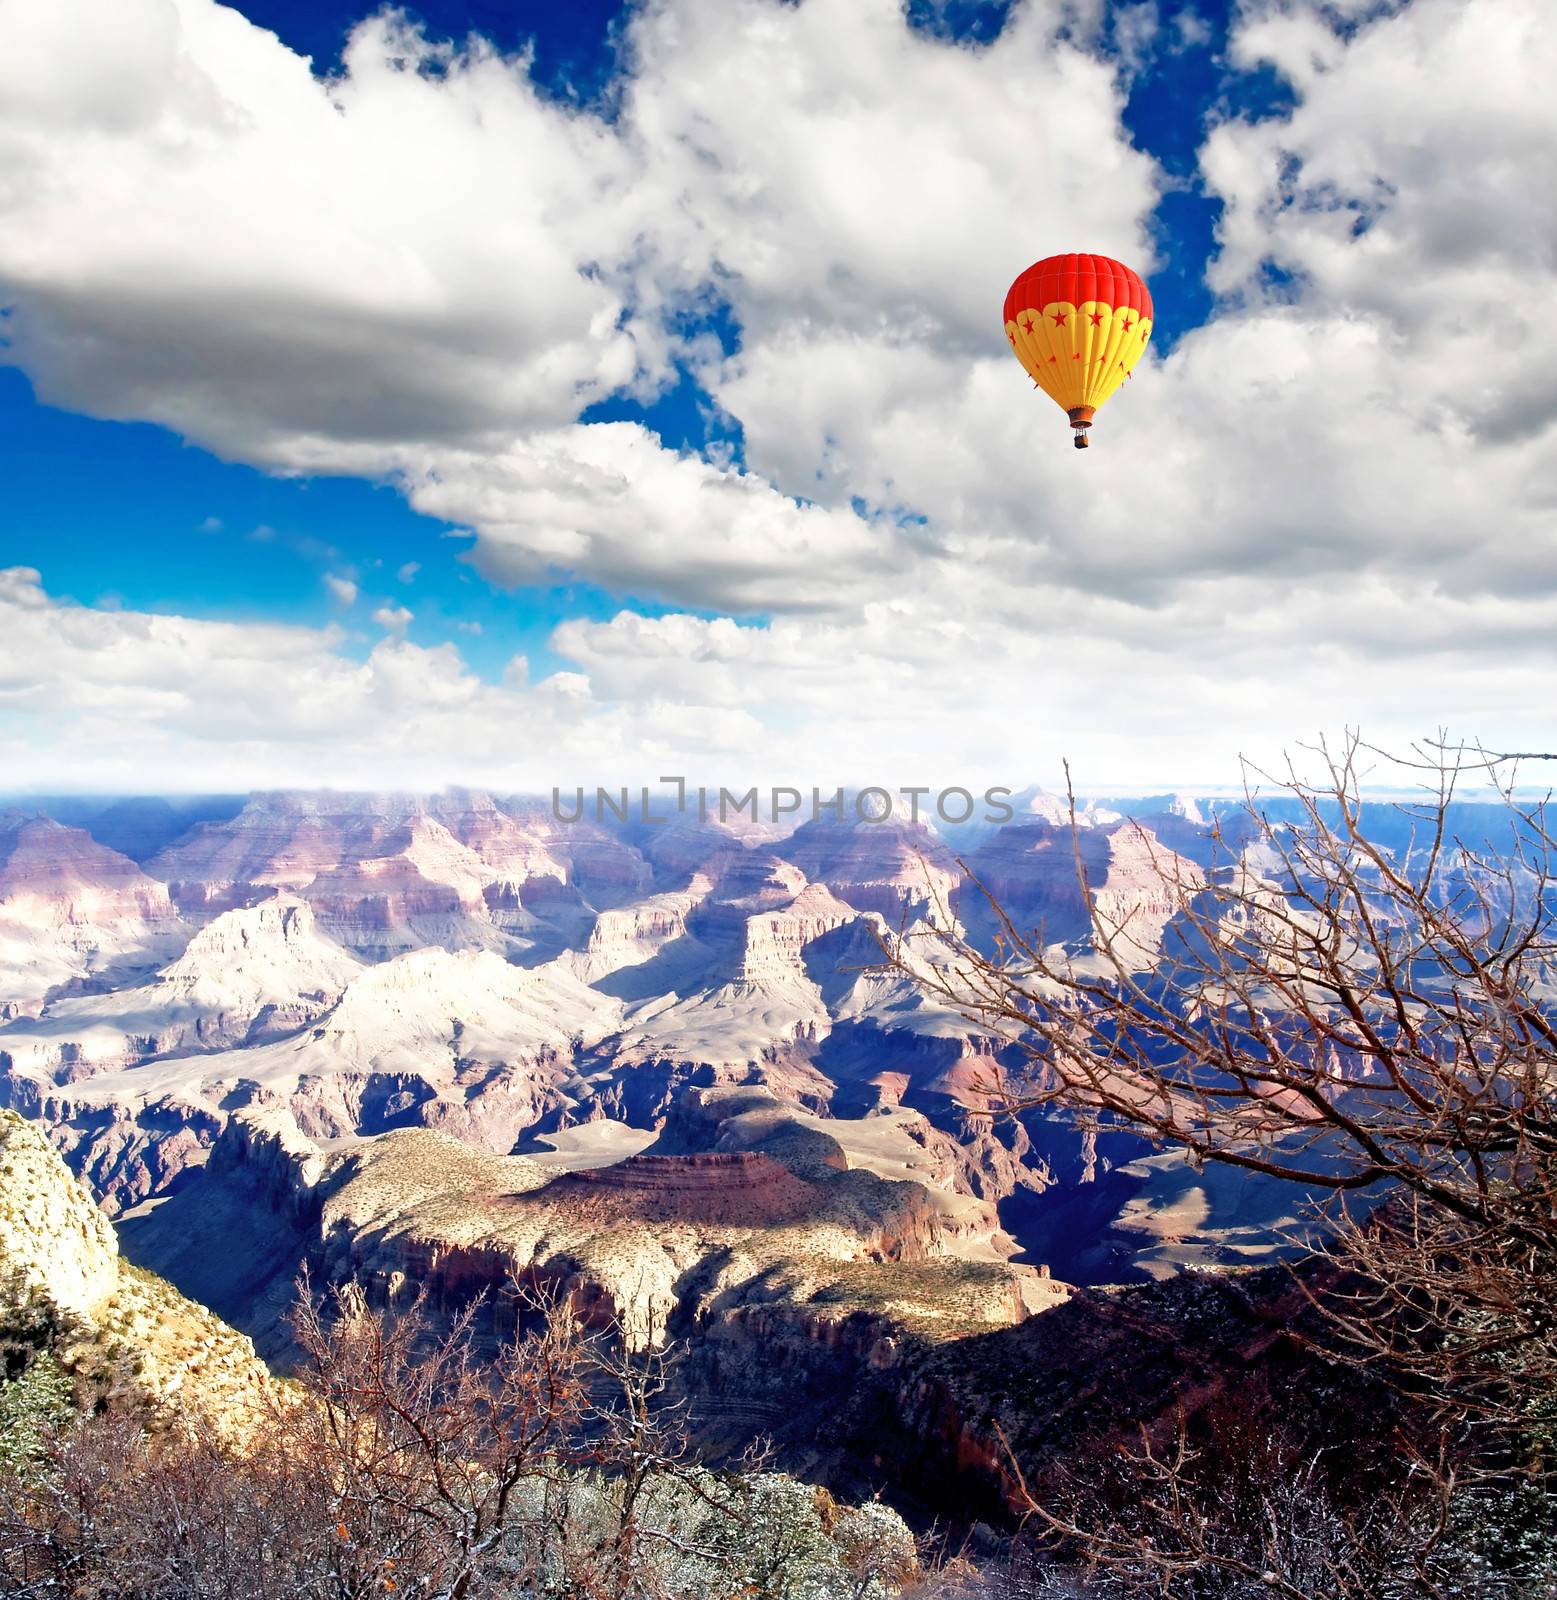 Grand Canyon National Park in Arizona by gary718